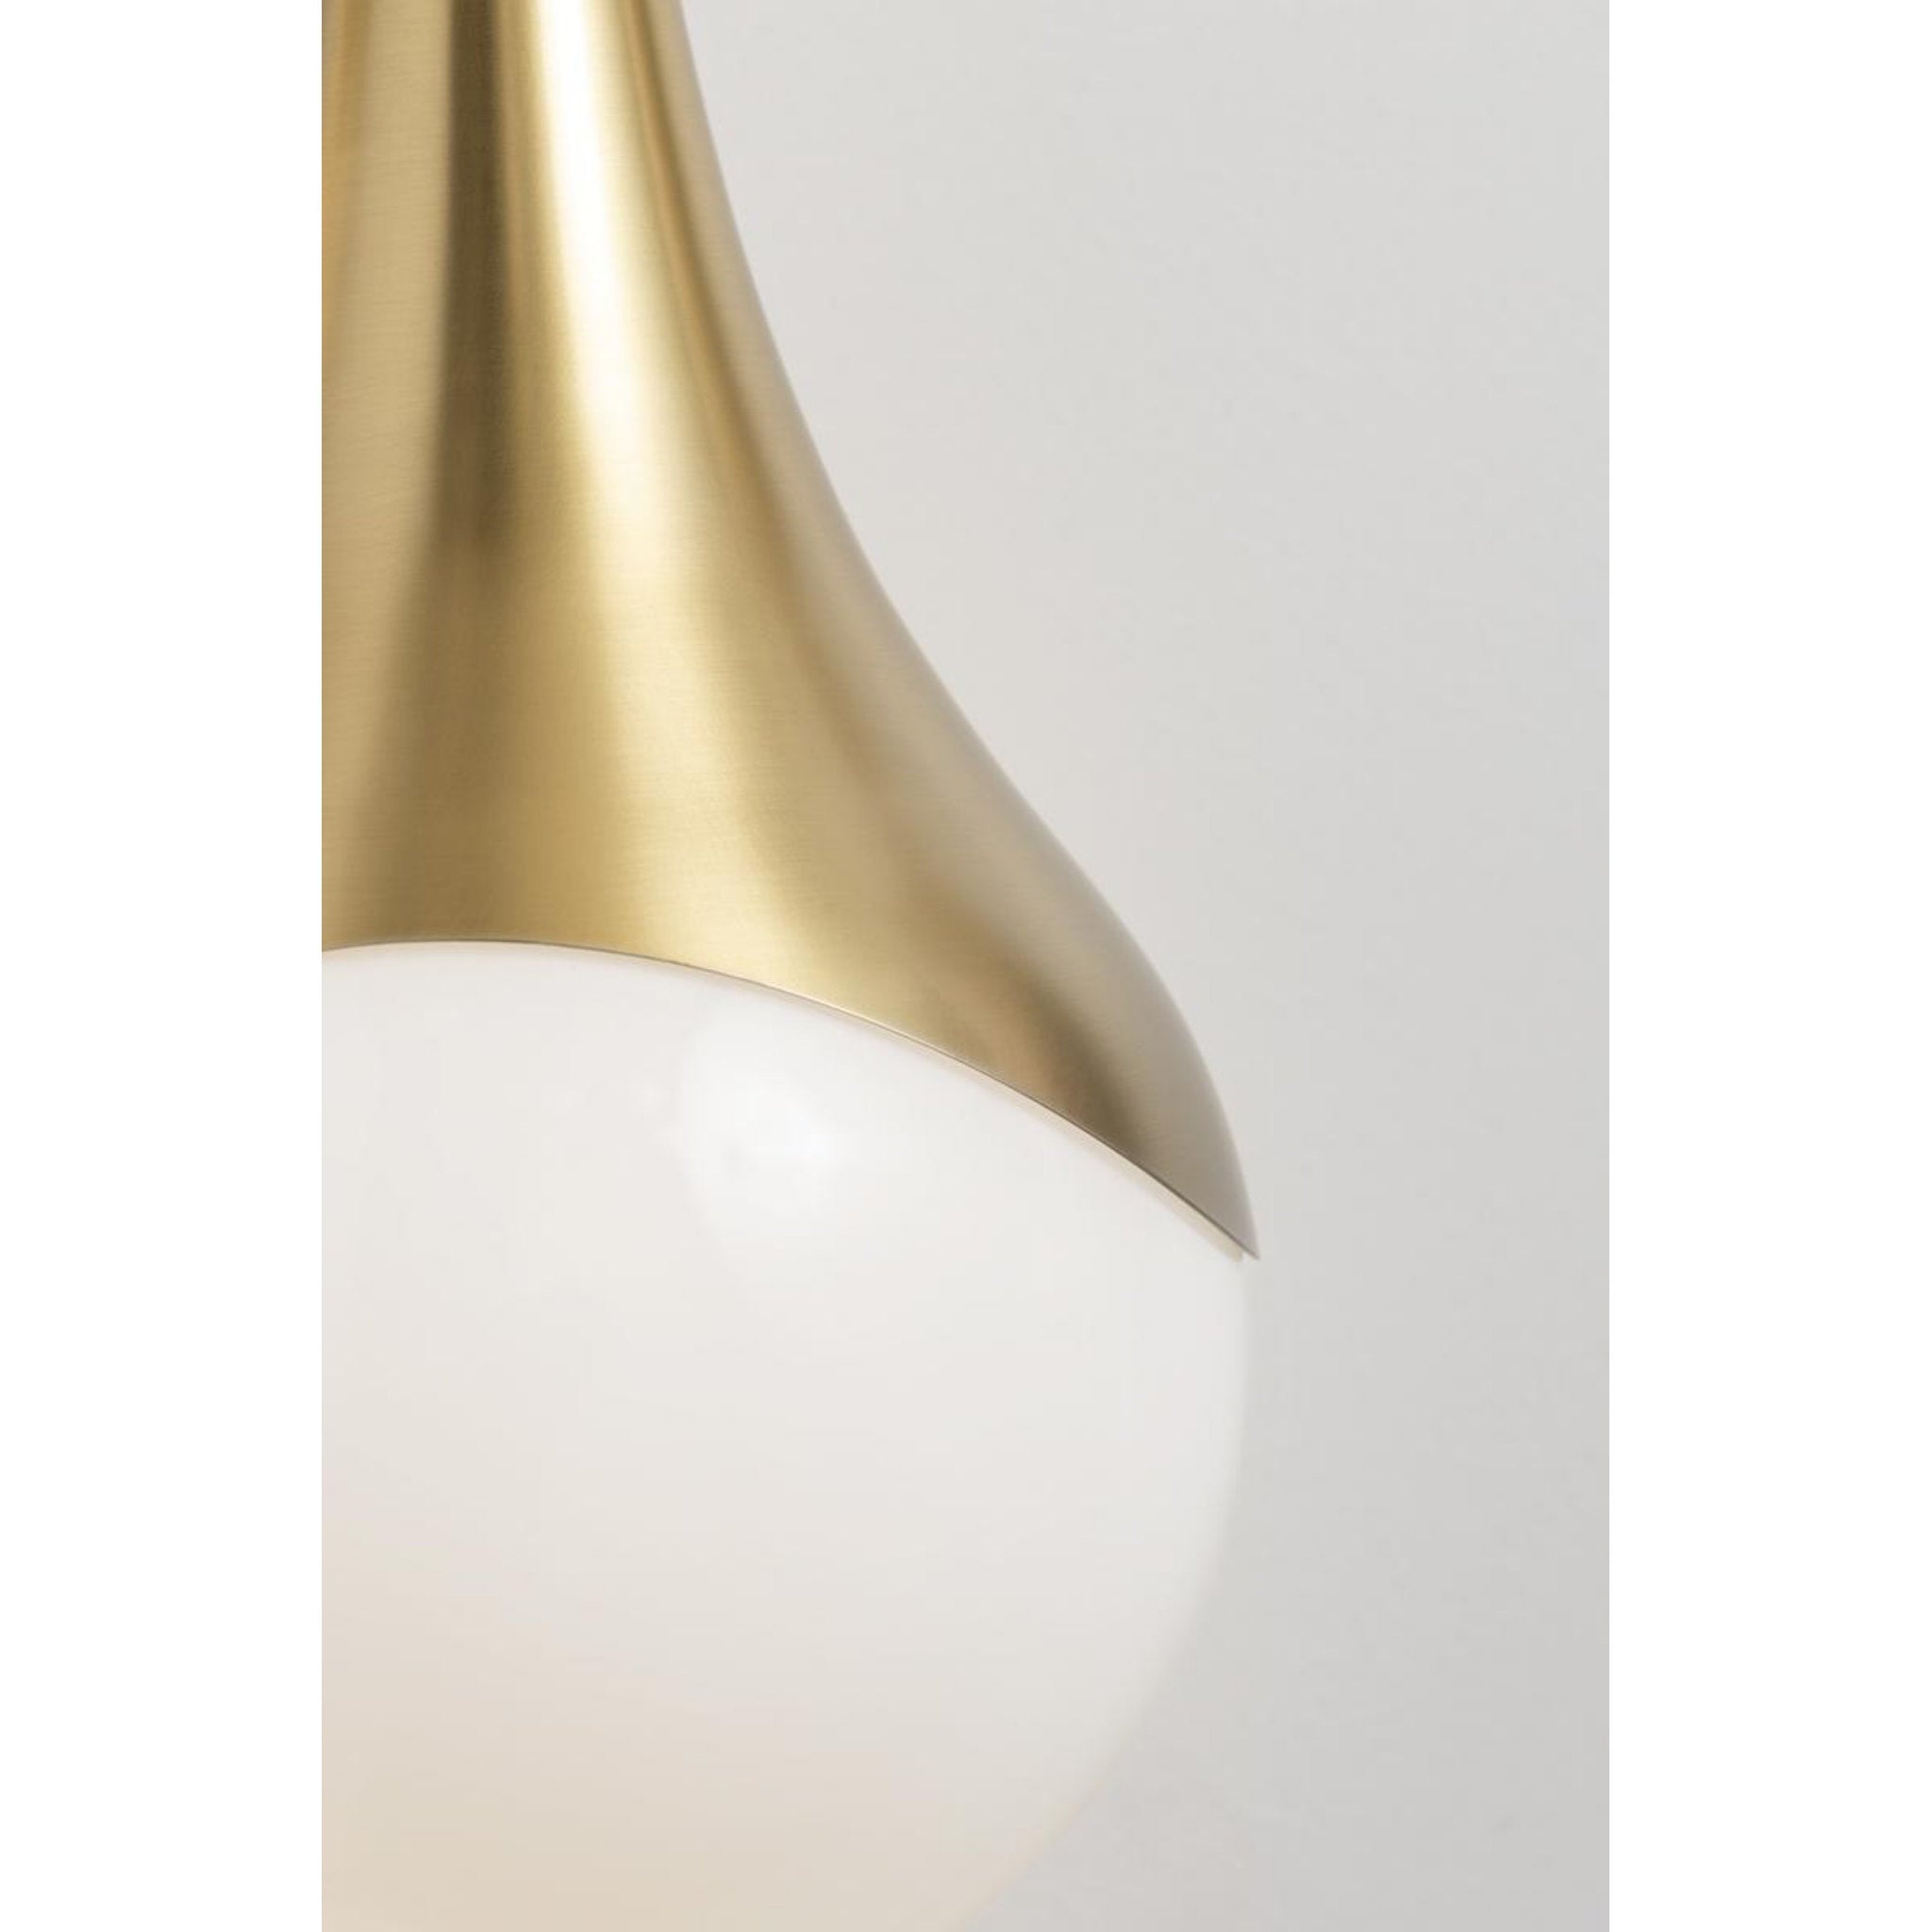 Ariana 1-Light Wall Sconce in Polished Nickel